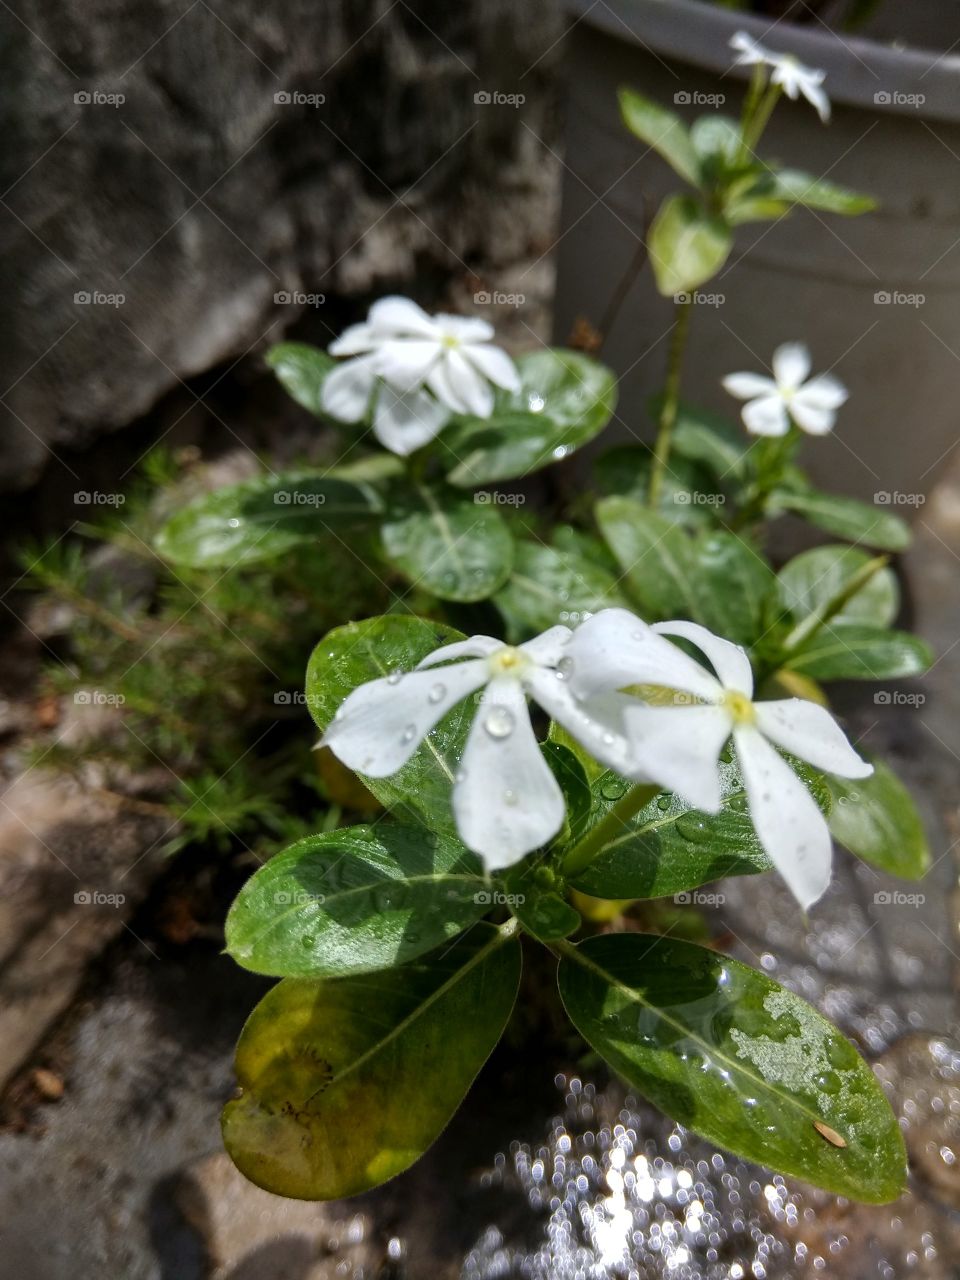 Pairs of white flowers with green leaves look like amazing in rain drops with natural beauty